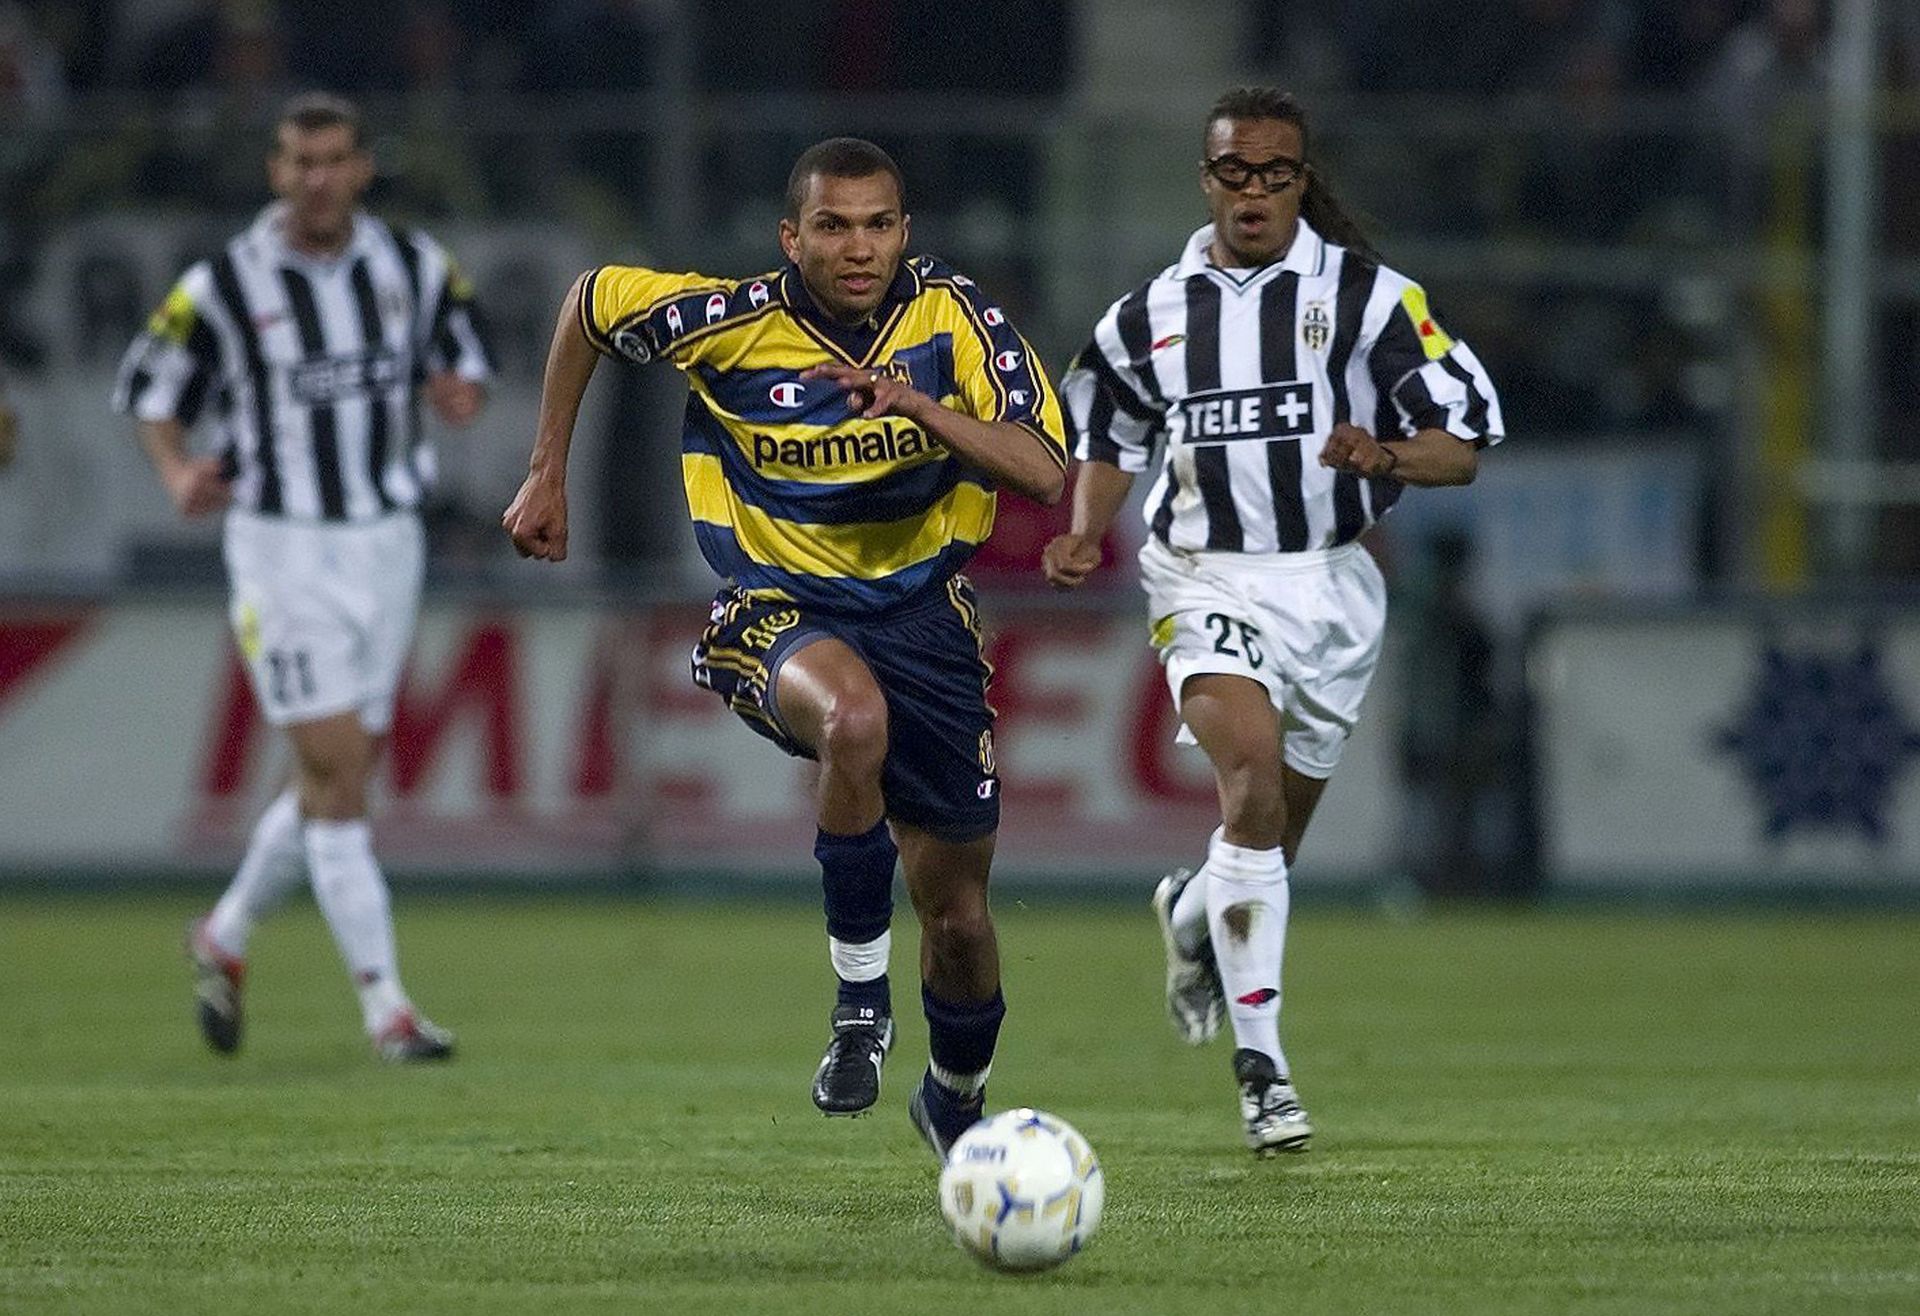 <p>                     After scoring 24 goals in 41 appearances for Udinese in the 1998/99 season, Marcio Santos was a player in demand.                   </p>                                      <p>                     The Brazilian forward was signed by Parma for €28 million, but his time with the Gialloblu was less successful and he scored just 18 times in 51 appearances across two seasons in an injury-interrupted spell at the Stadio Ennio Tardini.                   </p>